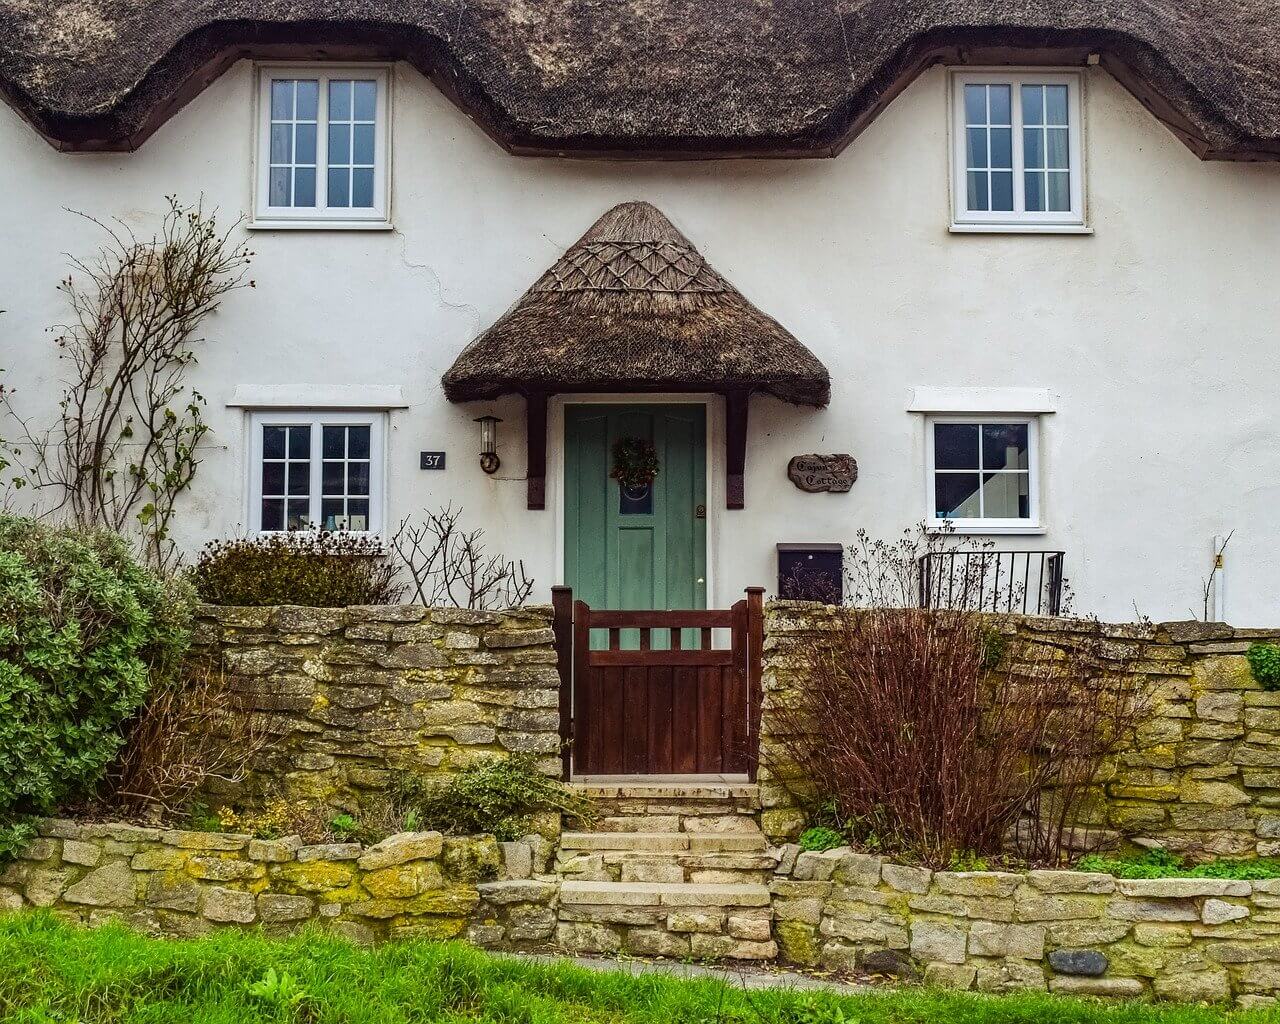 White countryside cottage with a thatched rood and green door.